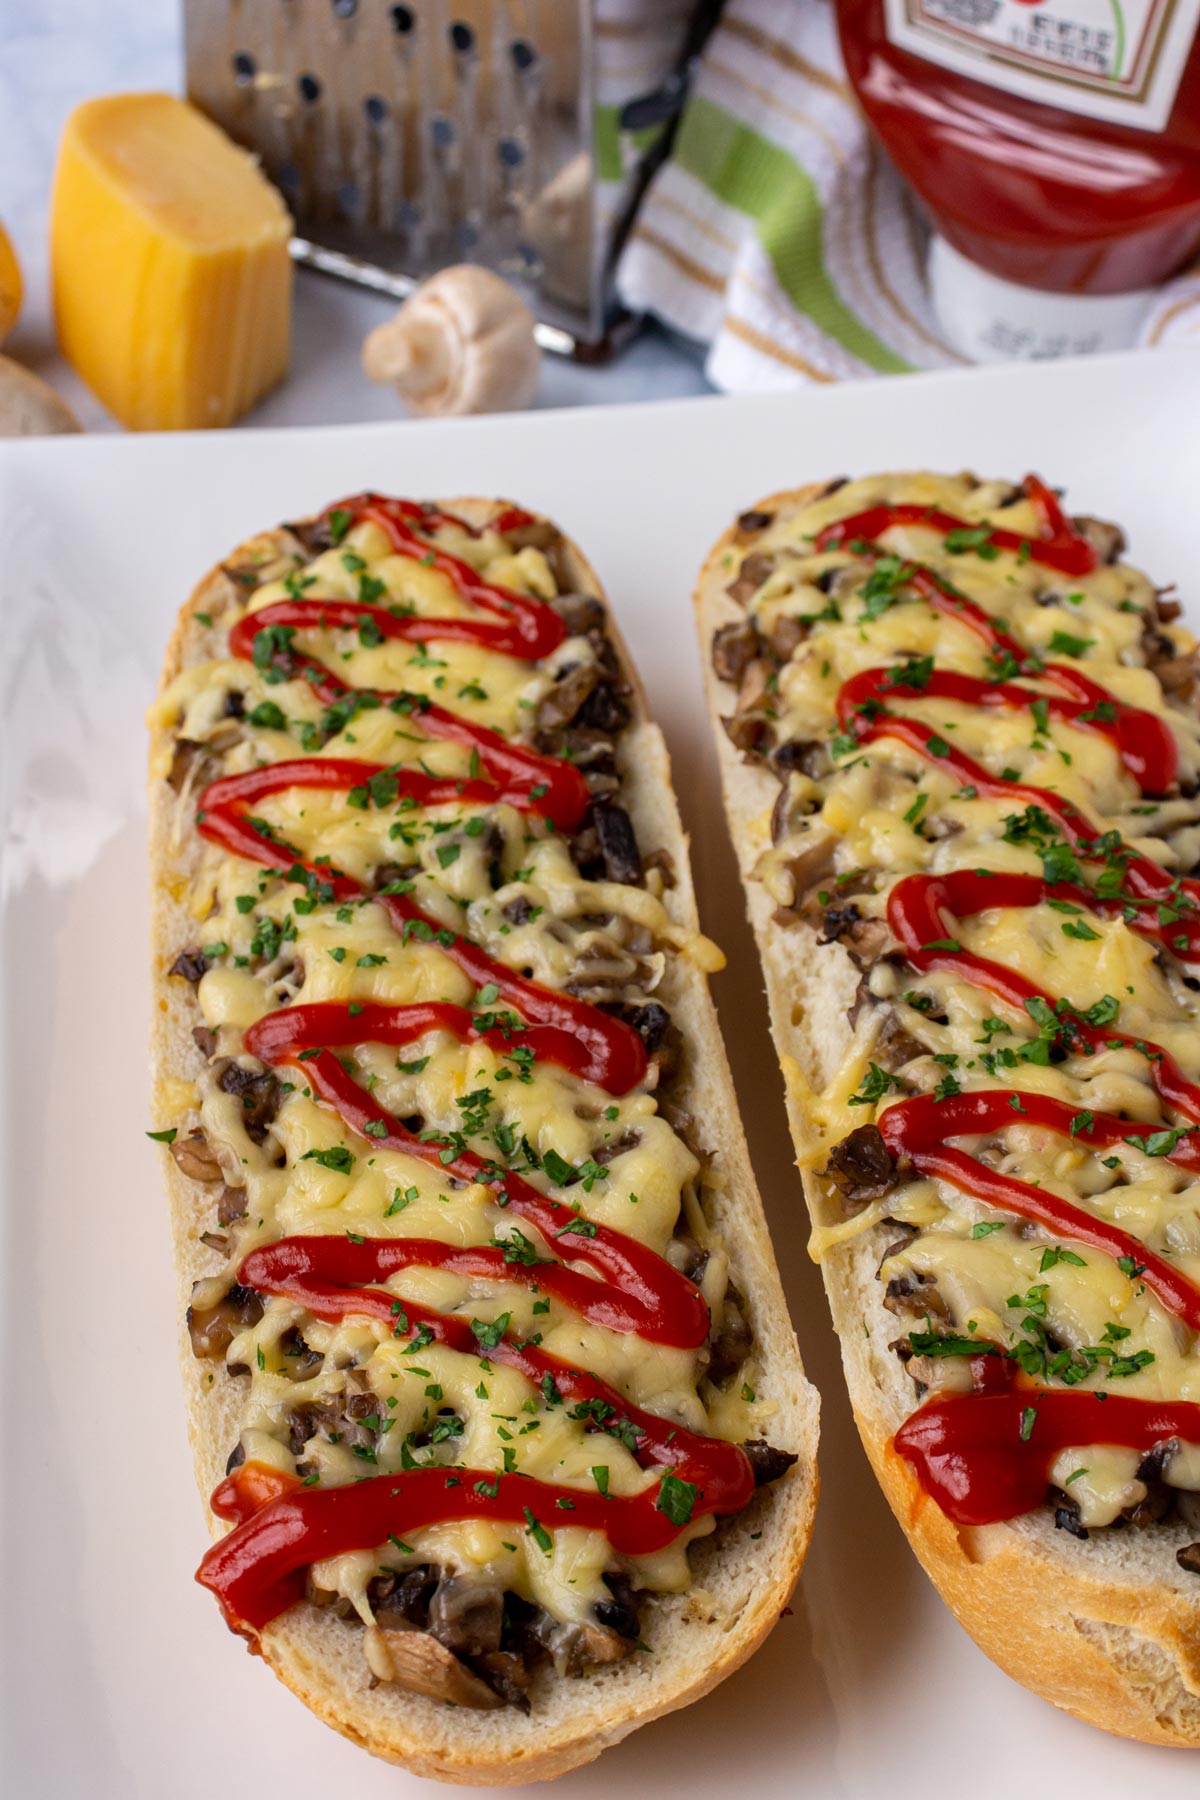 Open-faced baguette sandwiches with mushrooms, melted cheese, and drizzled ketchup on a white plate.